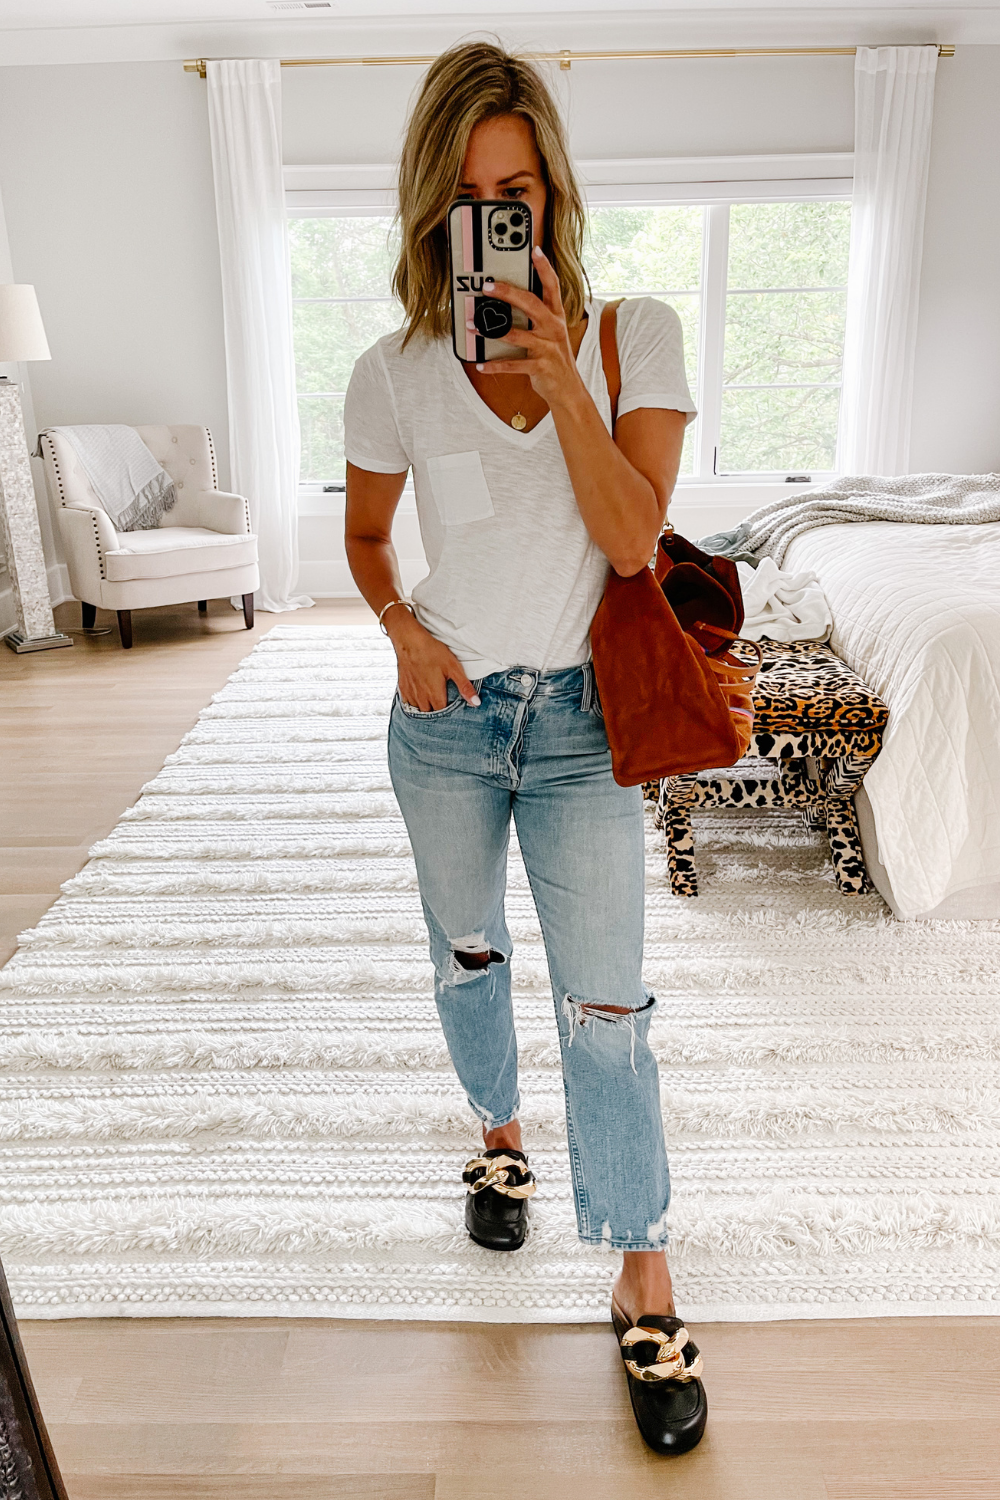 Suzanne wearing a white tee, denim jeans, mules and a tote